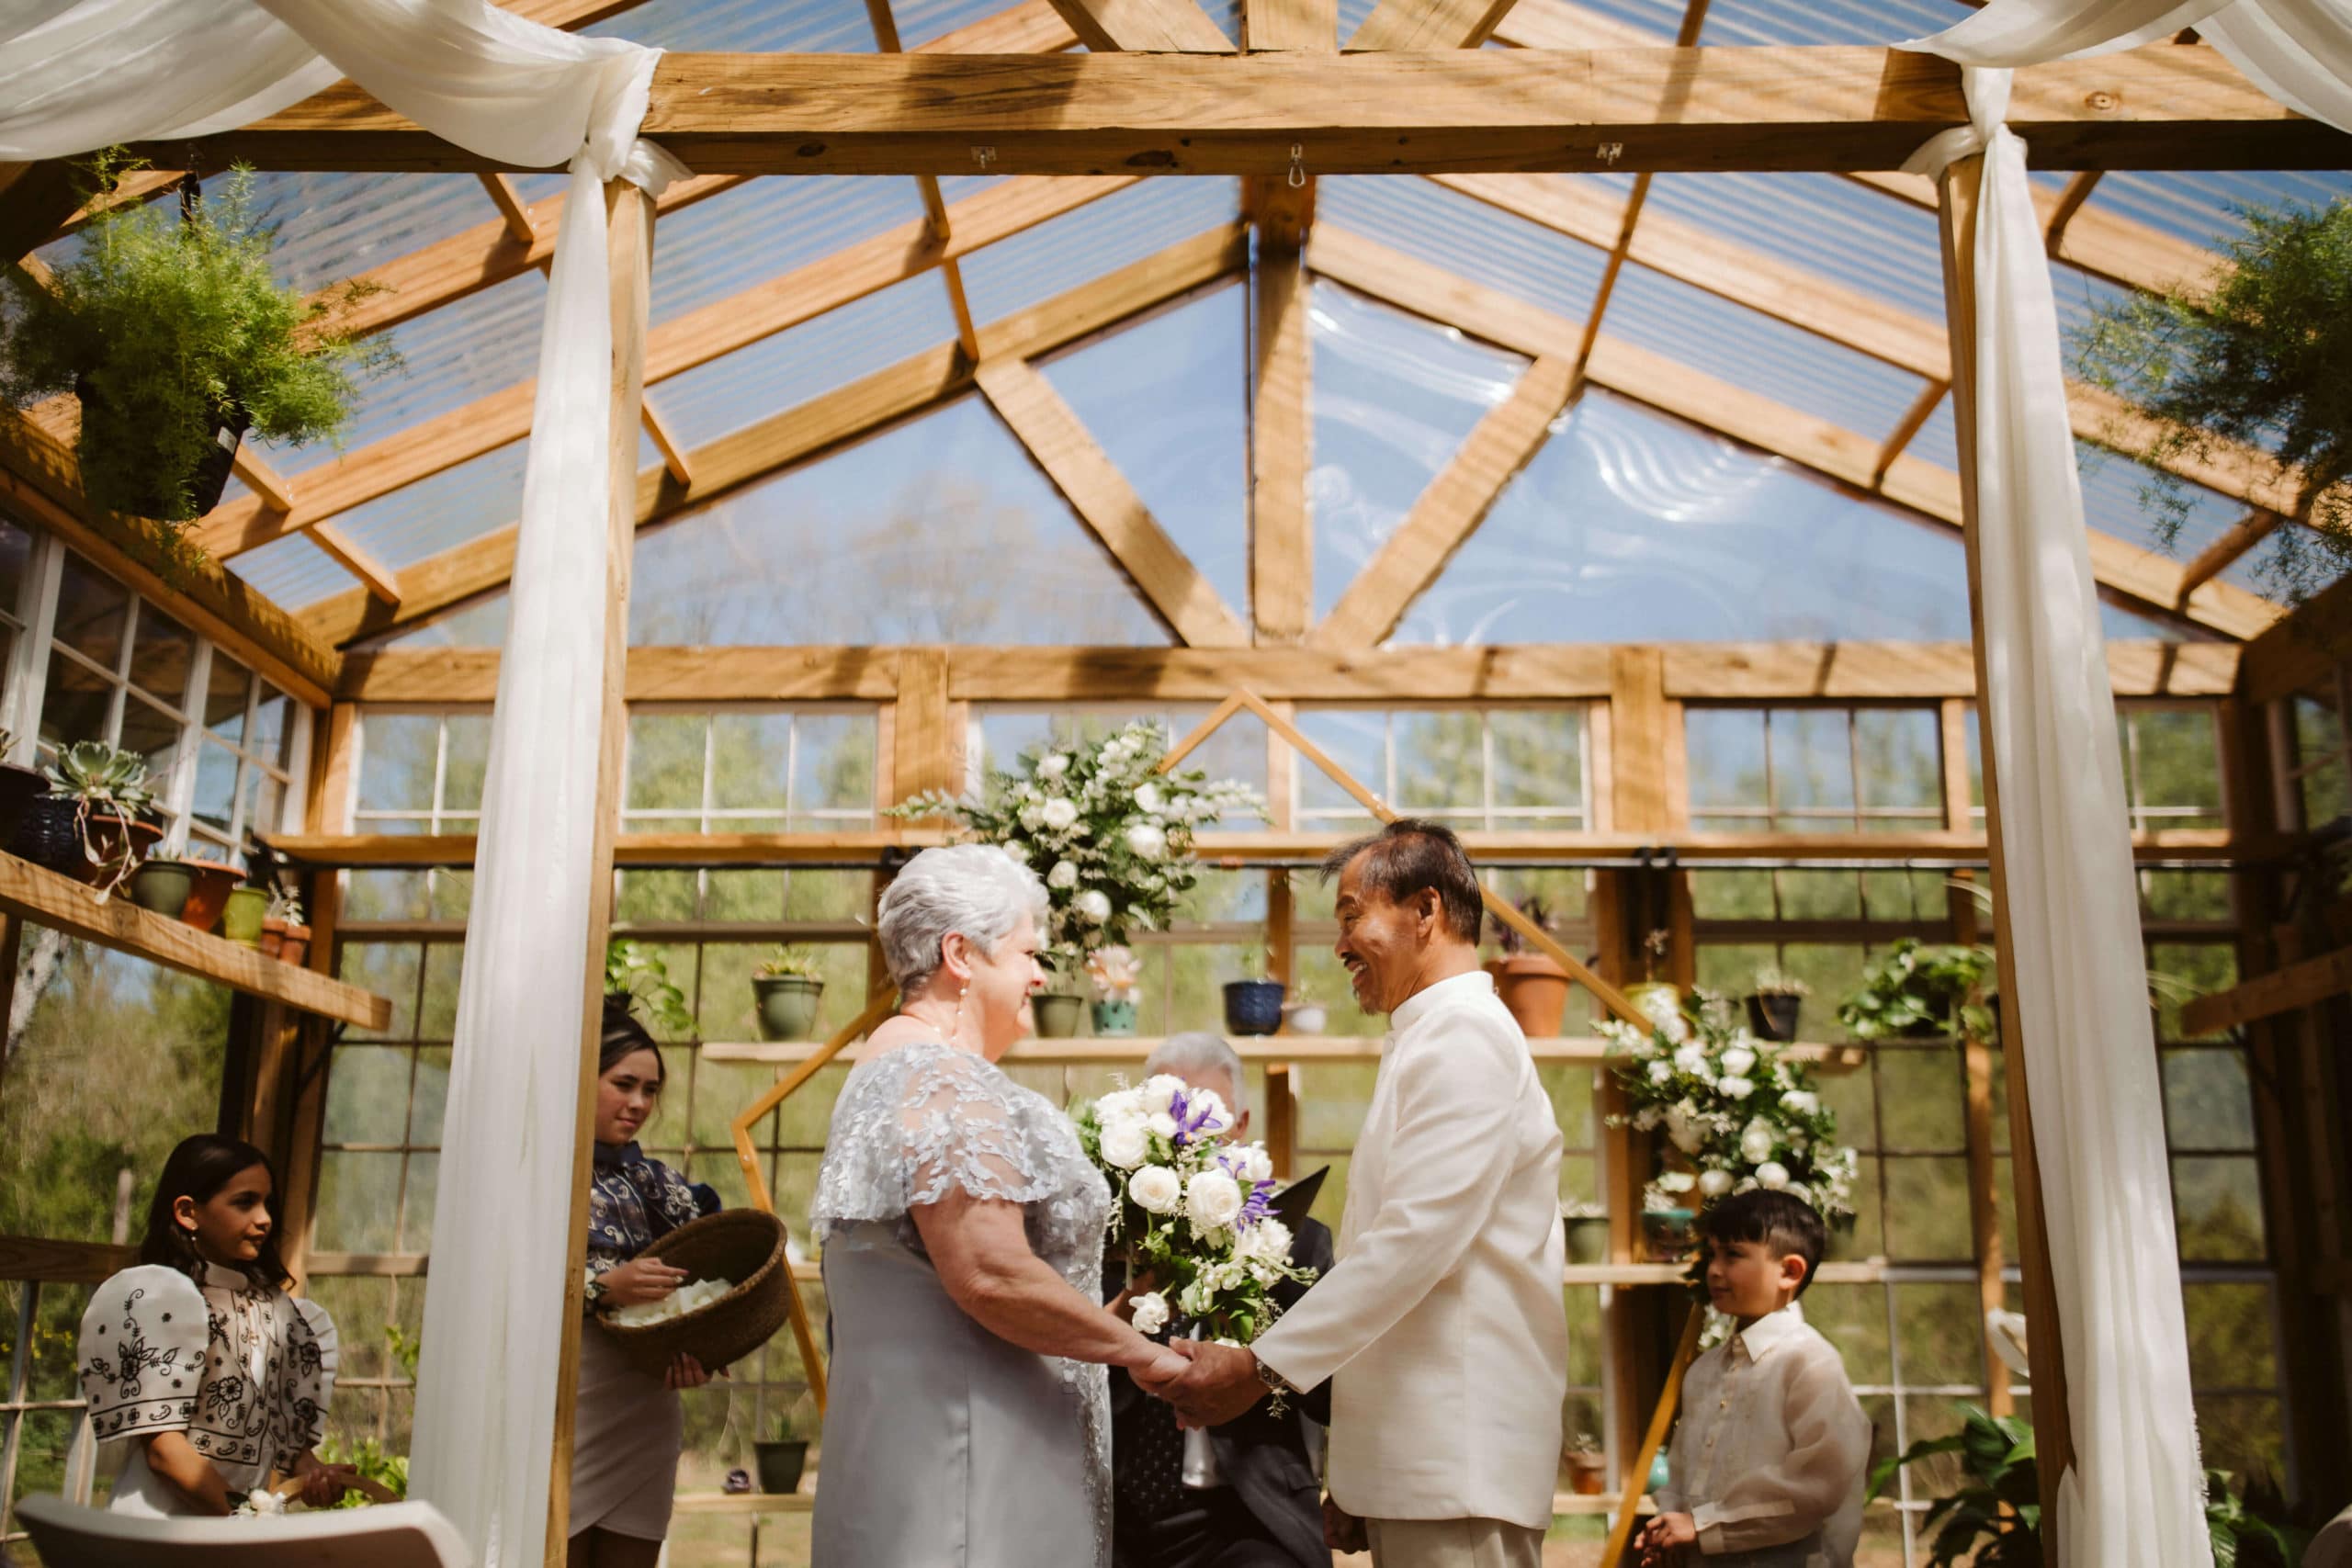 Vow renewal ceremony at Moser Manor Farm. Photo by OkCrowe Photography.